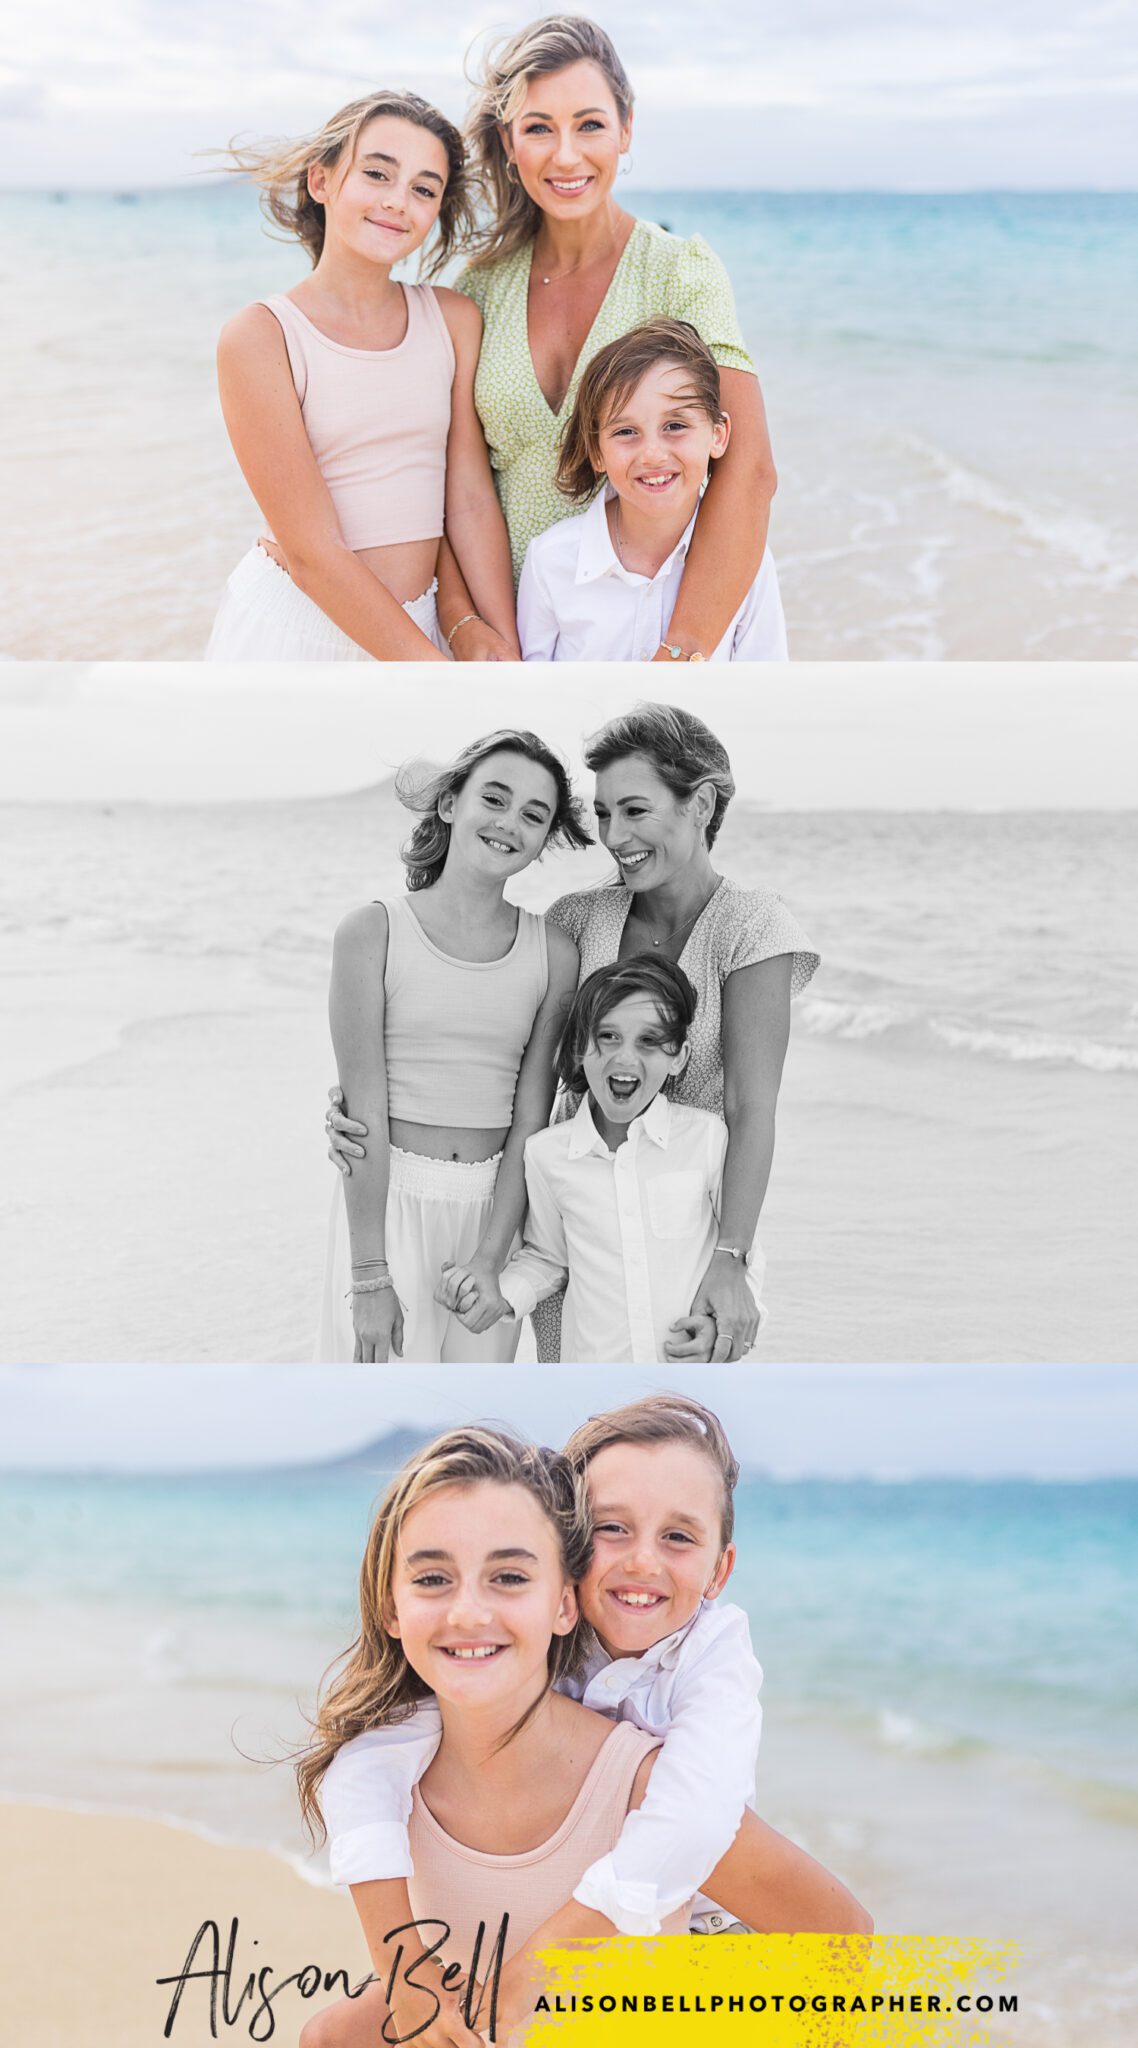 Oahu photographer mini session at Lanikai Beach by Alison Bell, Photographer